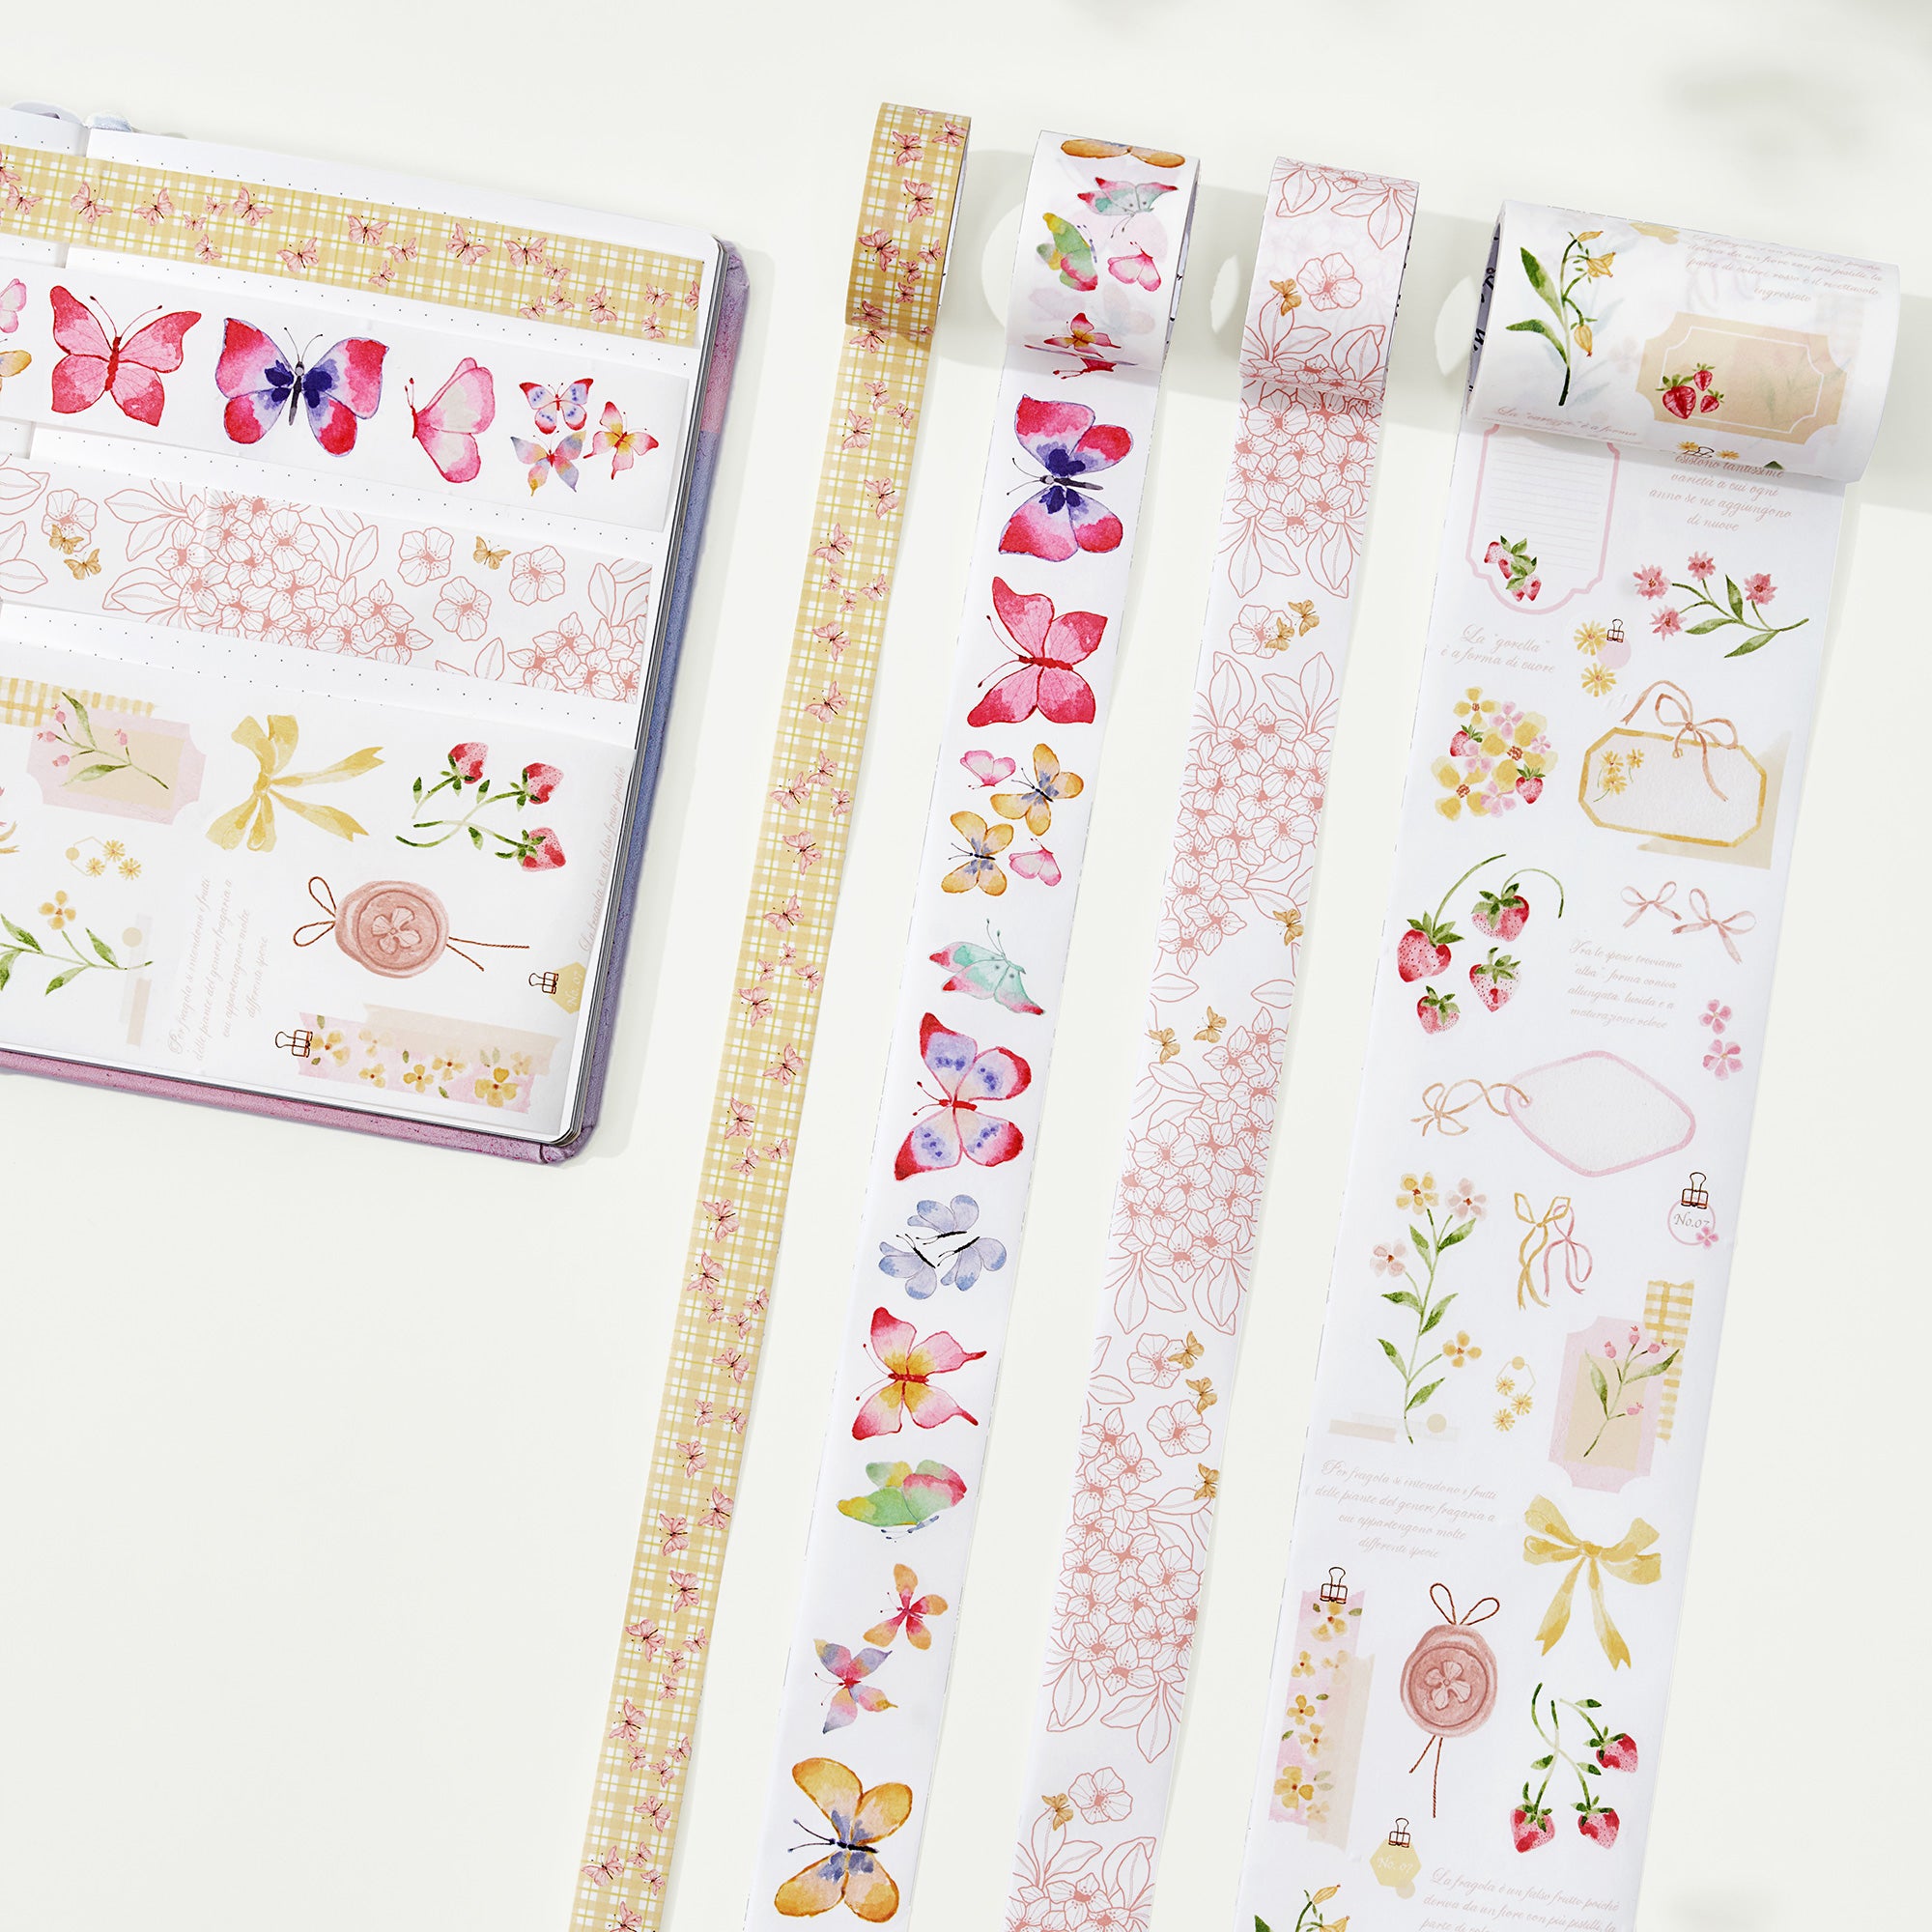 Fragole & Farfalle Washi Tape Sticker Set | The Washi Tape Shop. Beautiful Washi and Decorative Tape For Bullet Journals, Gift Wrapping, Planner Decoration and DIY Projects